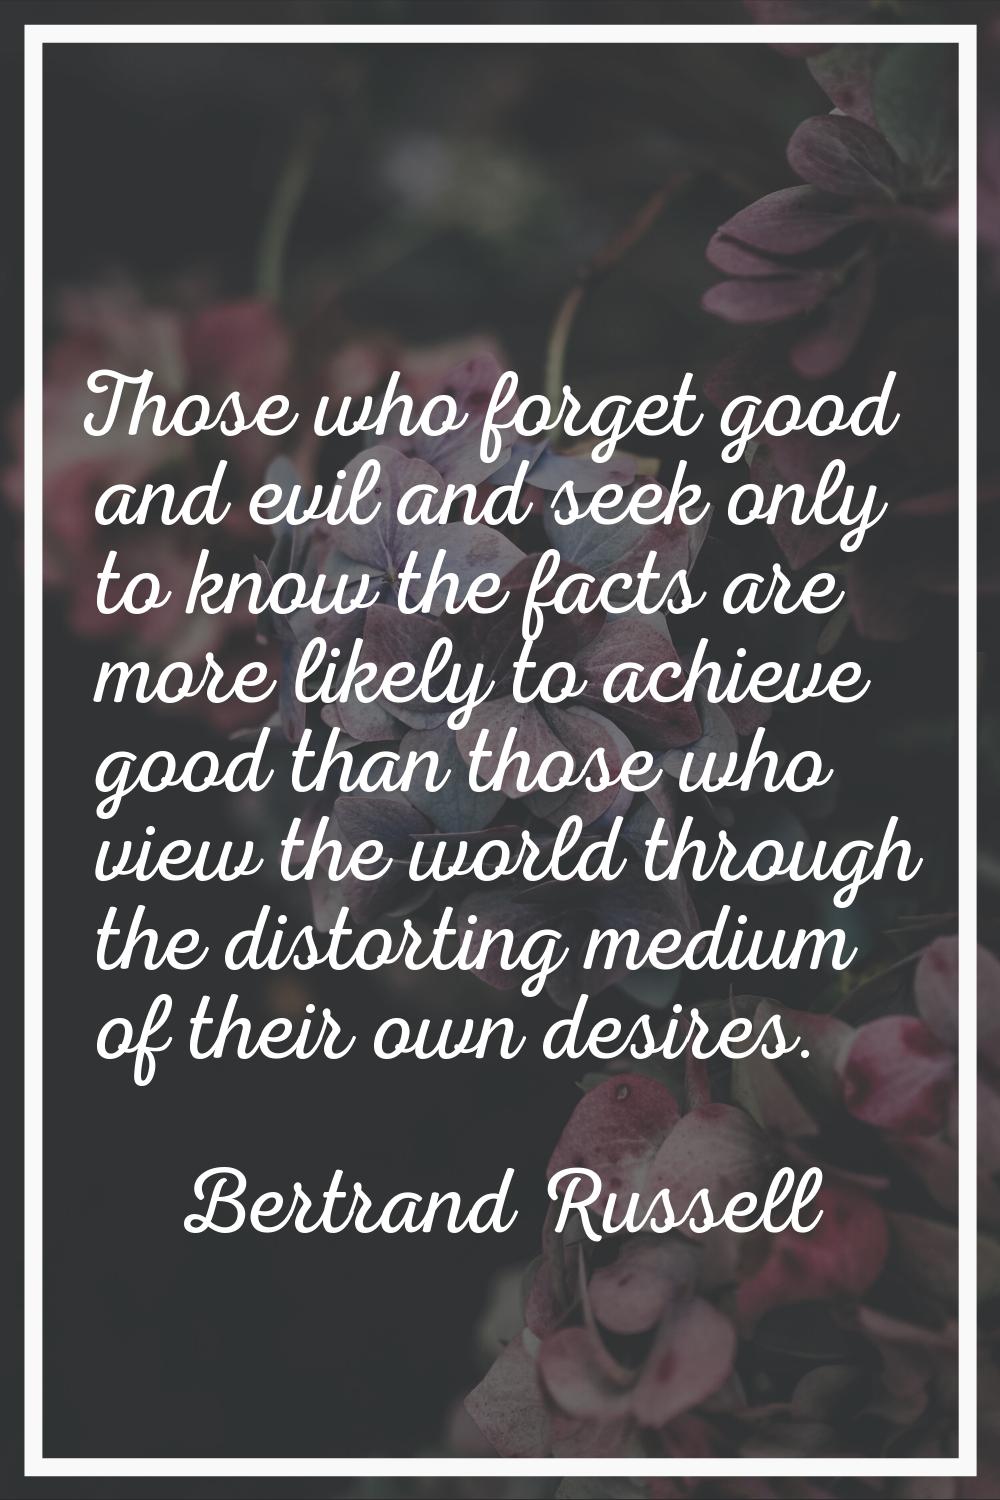 Those who forget good and evil and seek only to know the facts are more likely to achieve good than